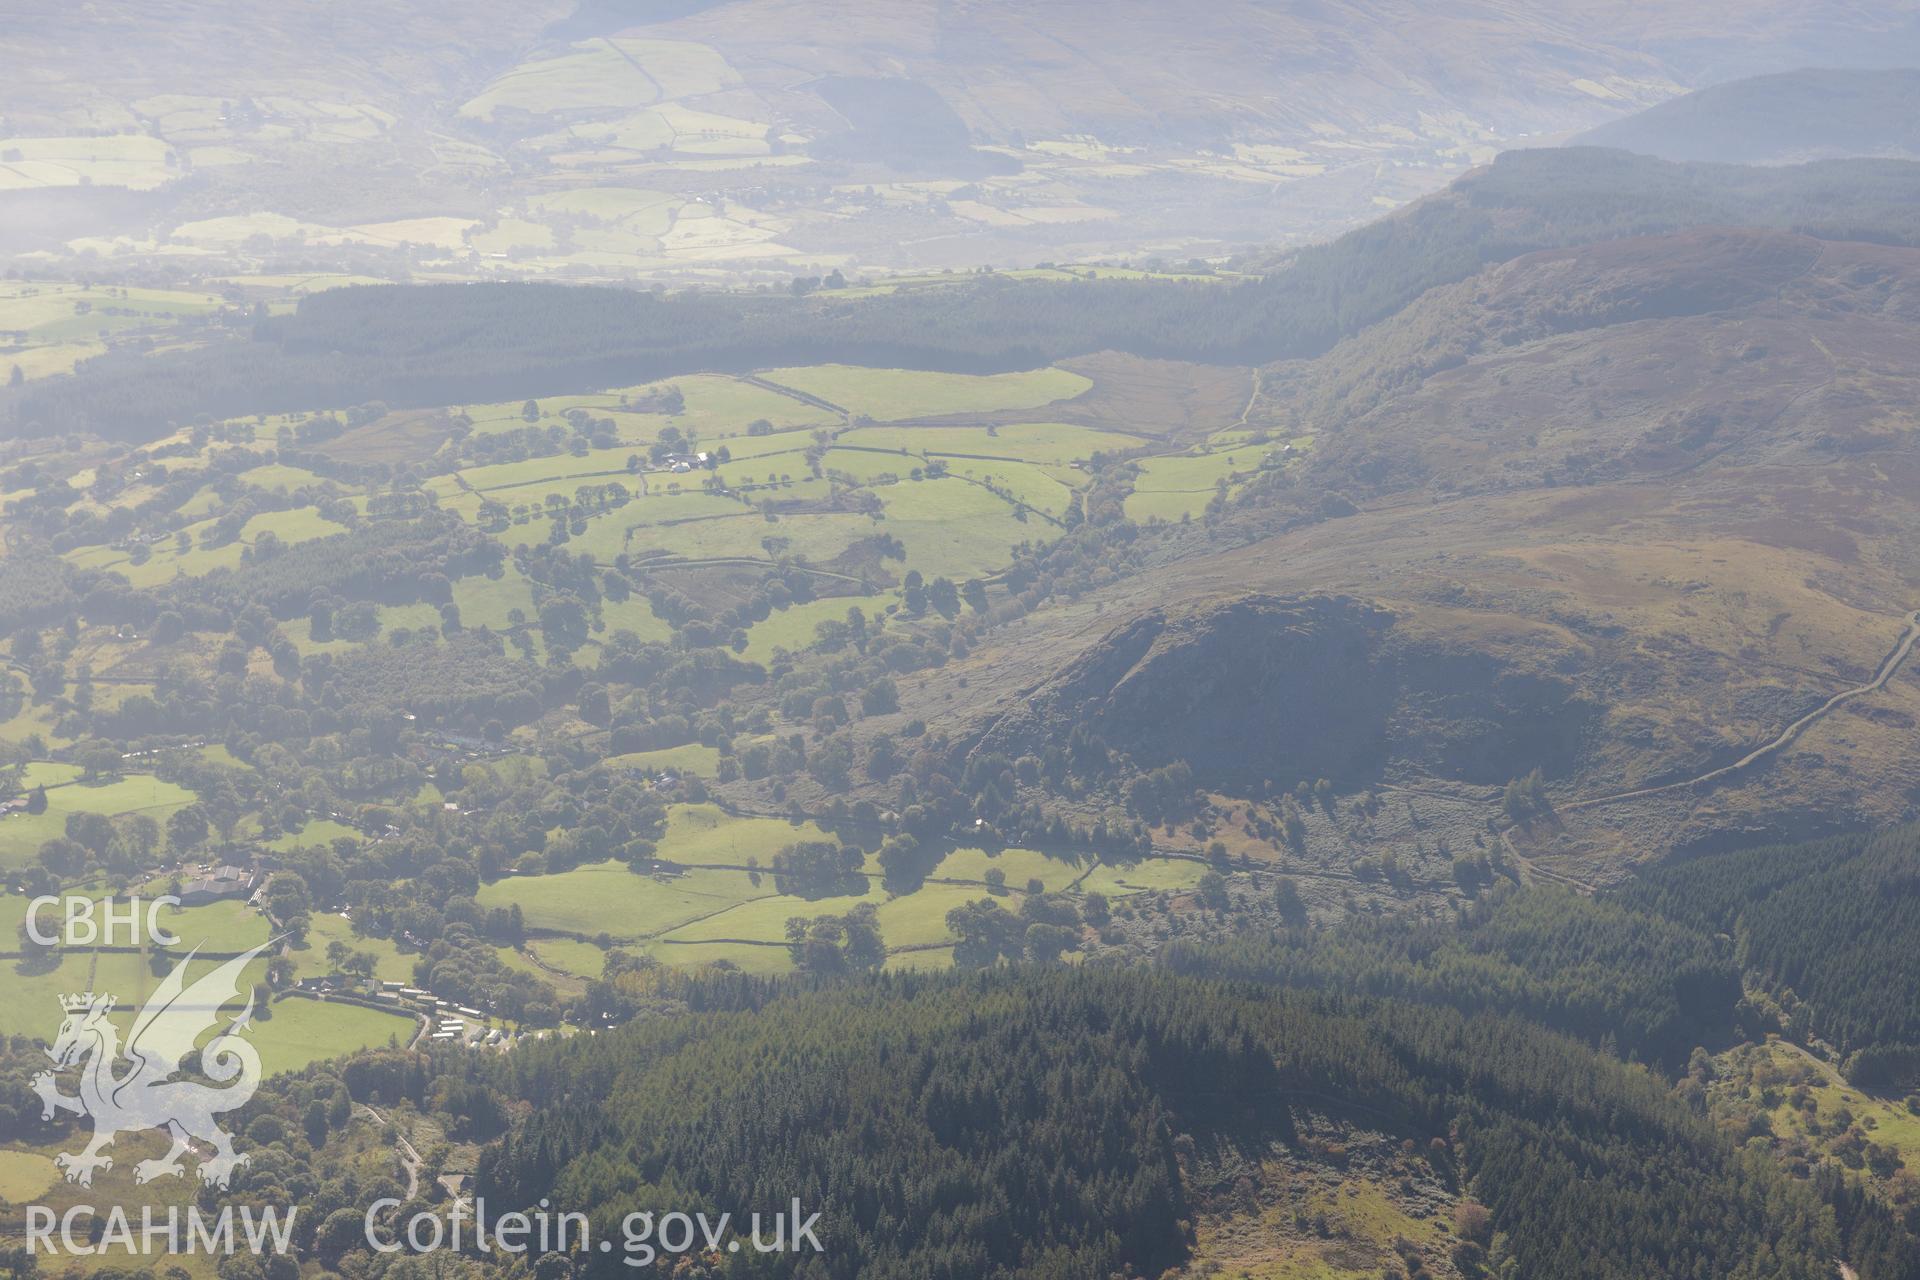 Castell Carndochan's crag and Coed Wenallt, overlooking the Lliw Valley, near Llanuwchlyn. Oblique aerial photograph taken during the Royal Commission's programme of archaeological aerial reconnaissance by Toby Driver on 2nd October 2015.